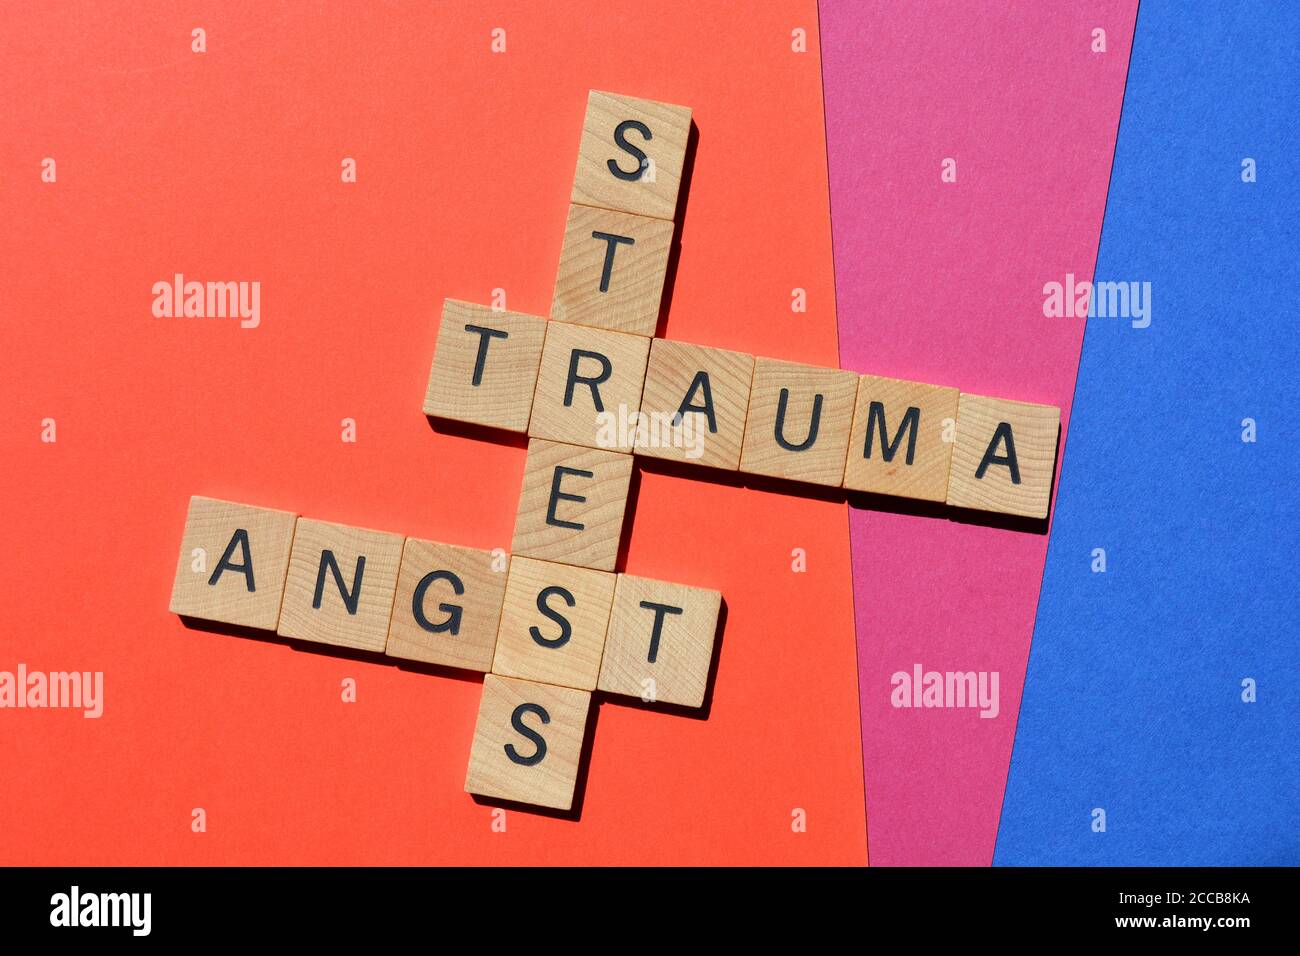 Stress, Trauma, Angst, words in wooden alphabet letters in crossword form on colourful background. Stock Photo